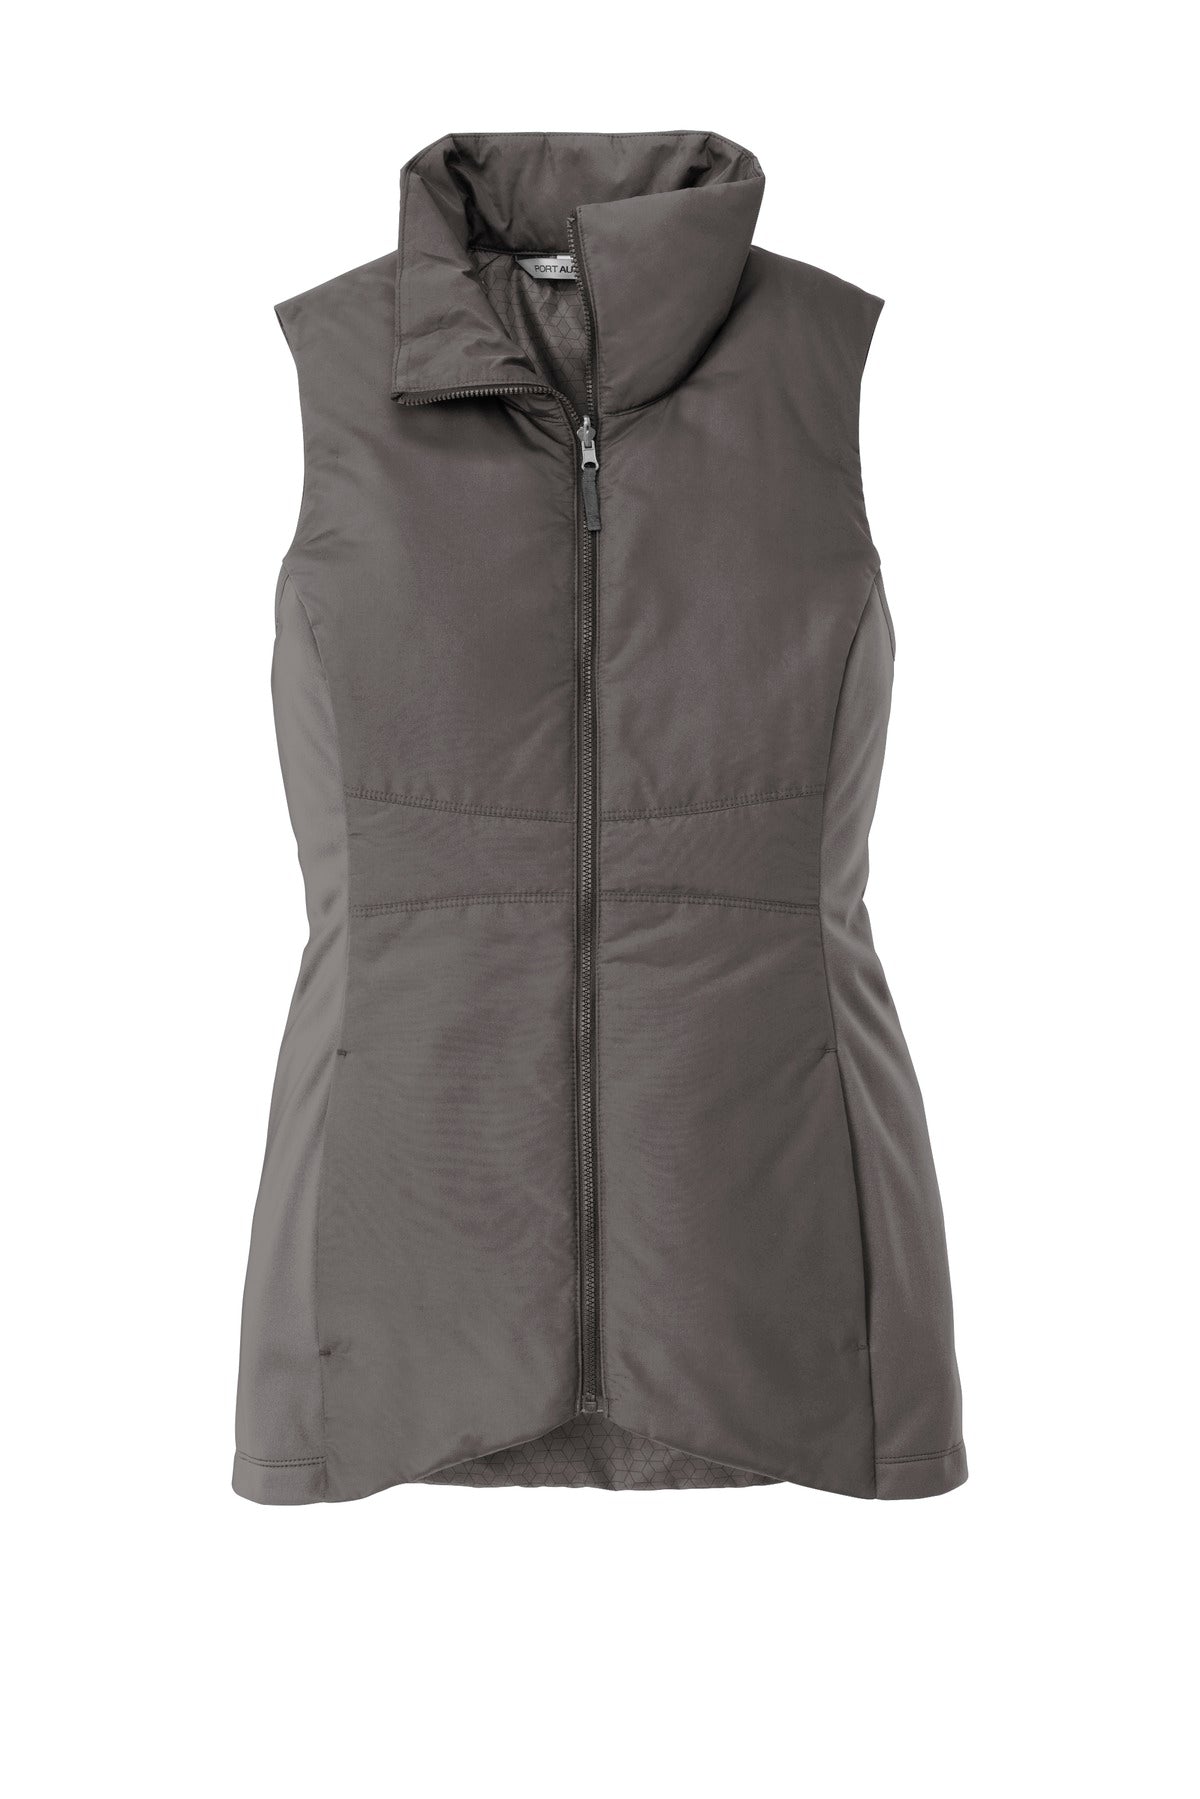 Port Authority Ladies Collective Insulated Vest. L903